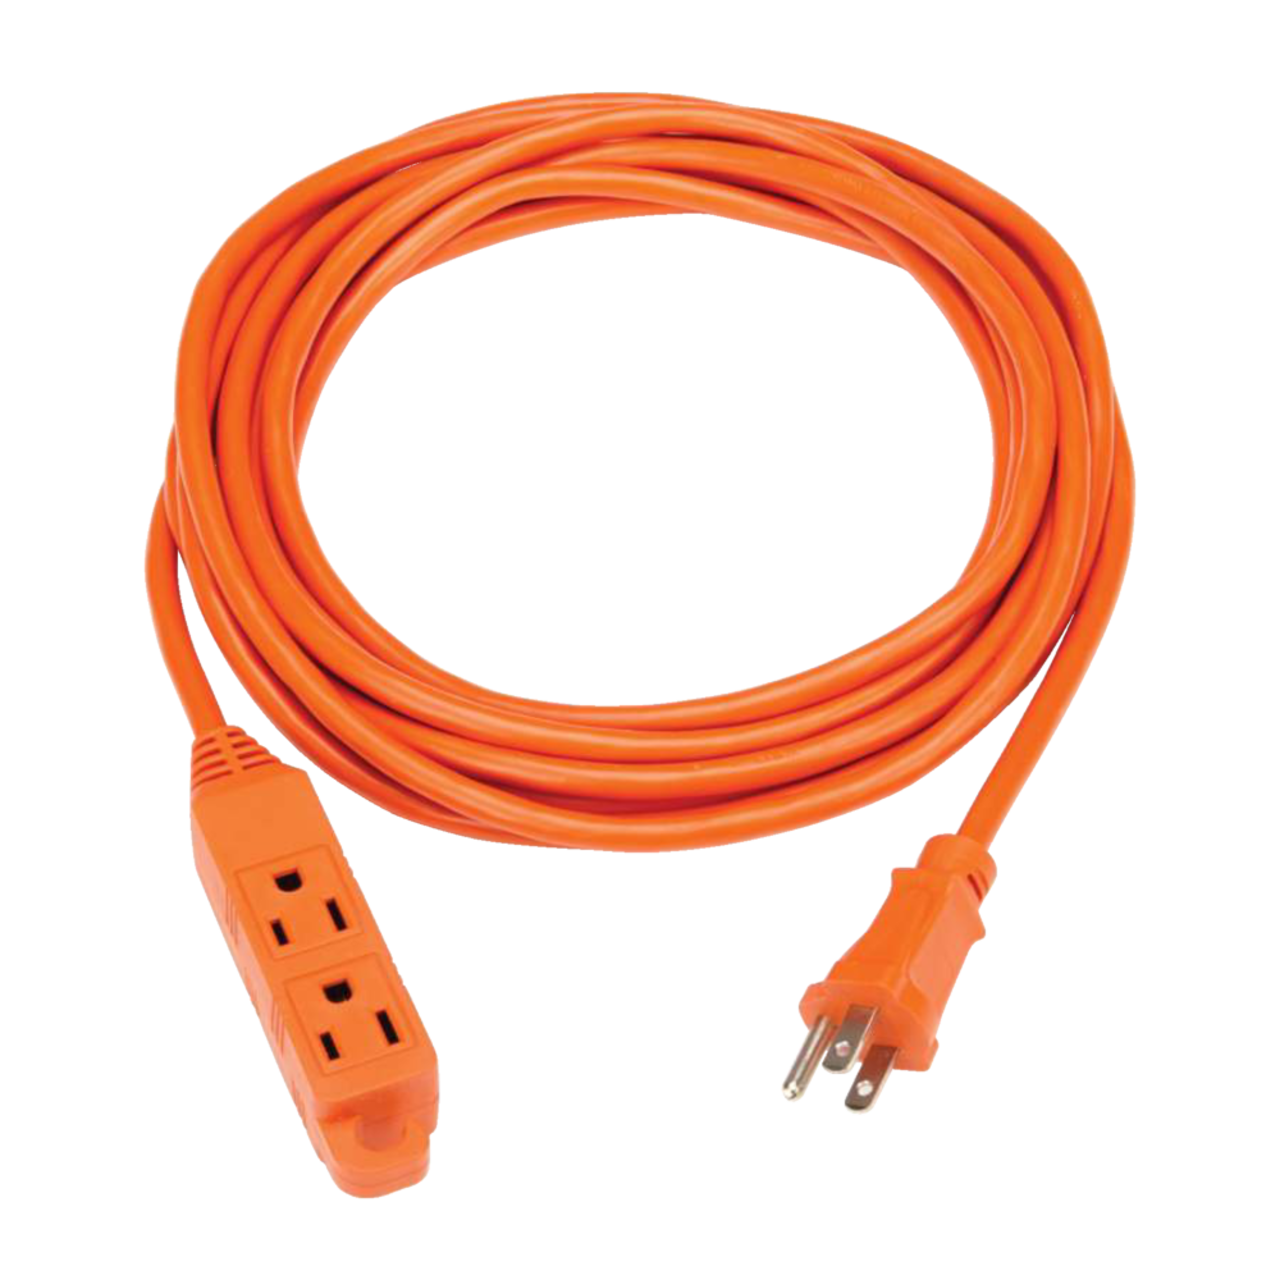 NOMA 16-ft 5-in 16/3 Outdoor Extension Cord with 3 Grounded Outlets, Orange